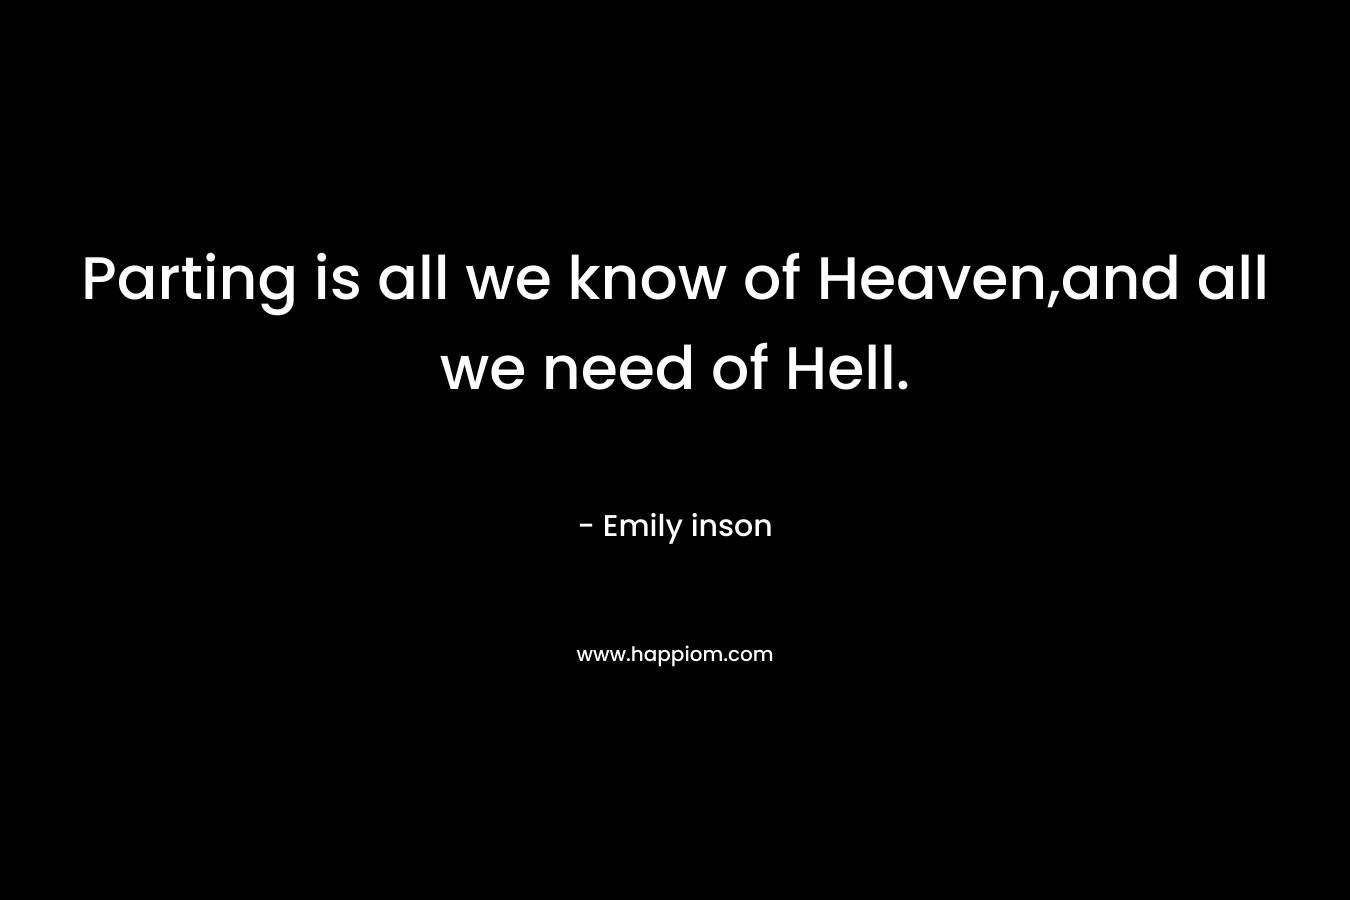 Parting is all we know of Heaven,and all we need of Hell.